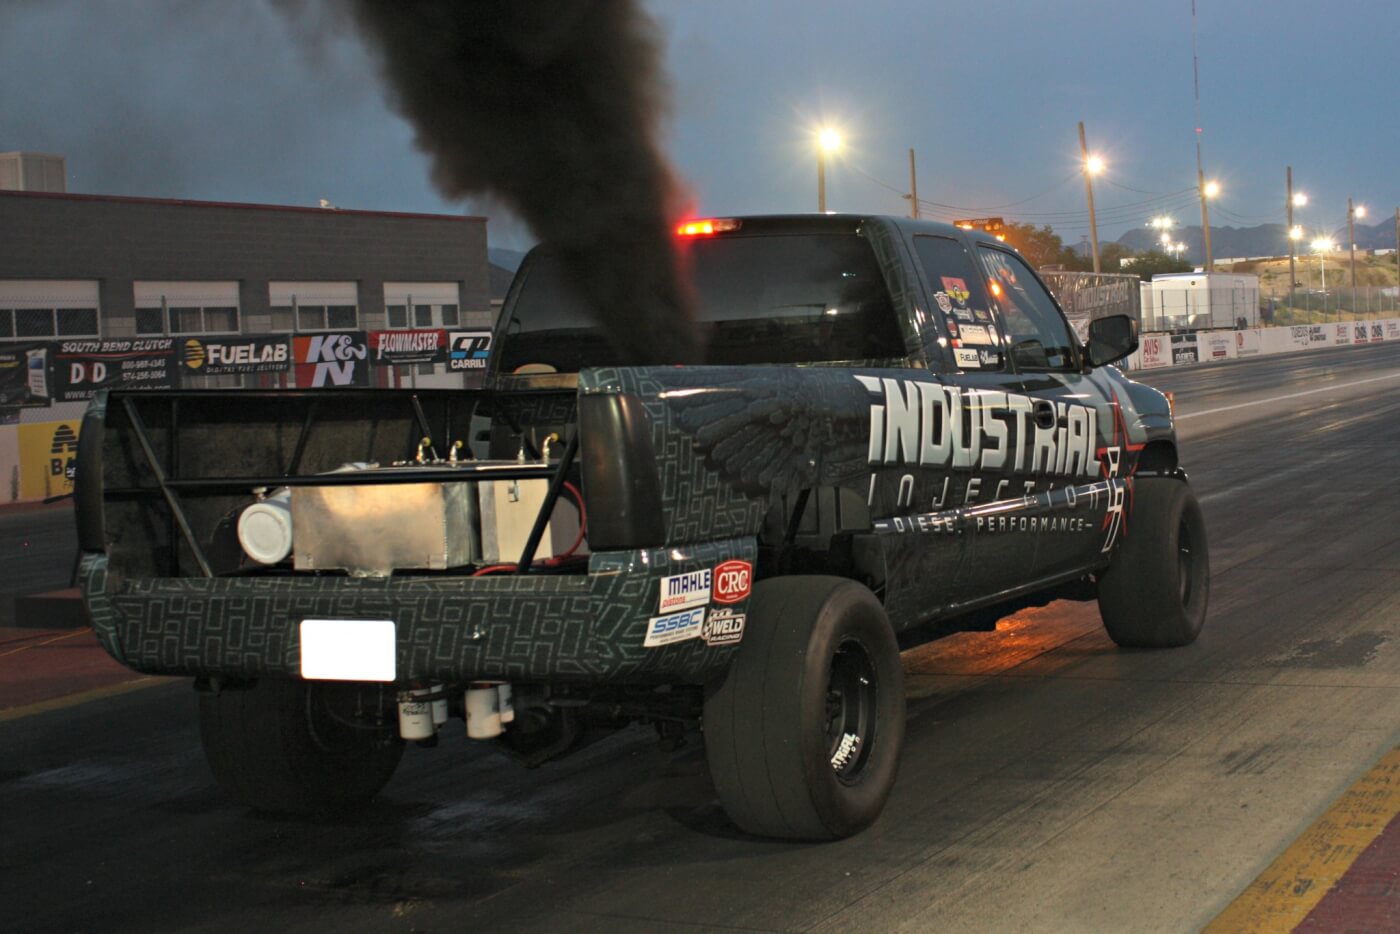 Industrial Injection debuted their latest creation for the drag strip: a dedicated LB7 Duramax-powered drag truck, complete with its rear-mounted fuel cell and fiberglass front clip. Lead engine tech Shawn Baca pushed this 1,500-hp twin-turbo nitrous-injected machine into the low 10s before breaking the drivetrain in the final round.